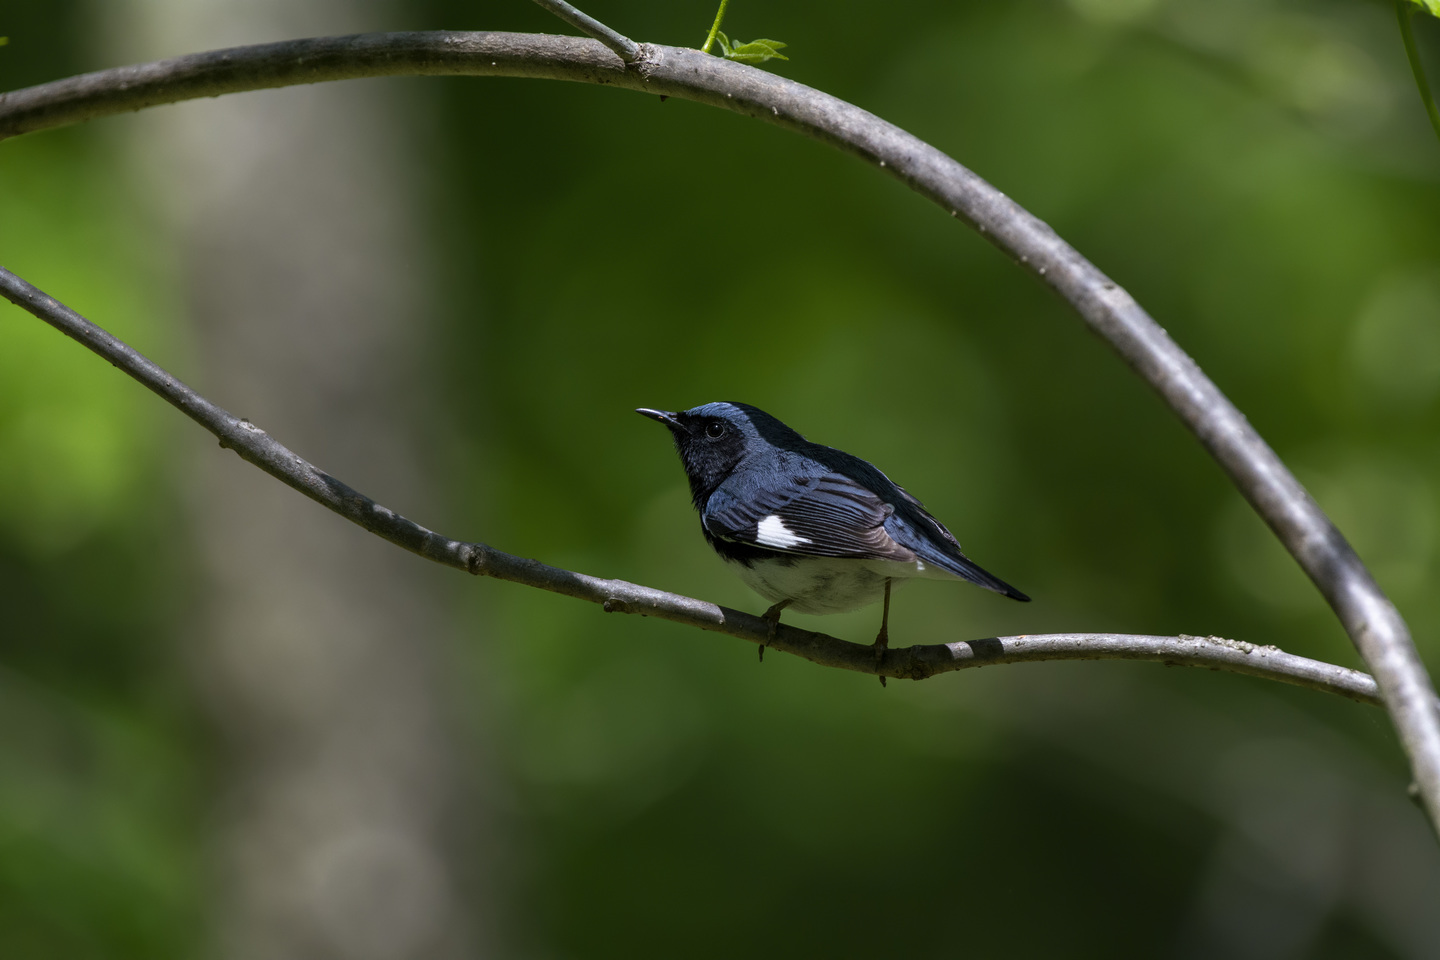 A dark colored songbird perched on a branch.